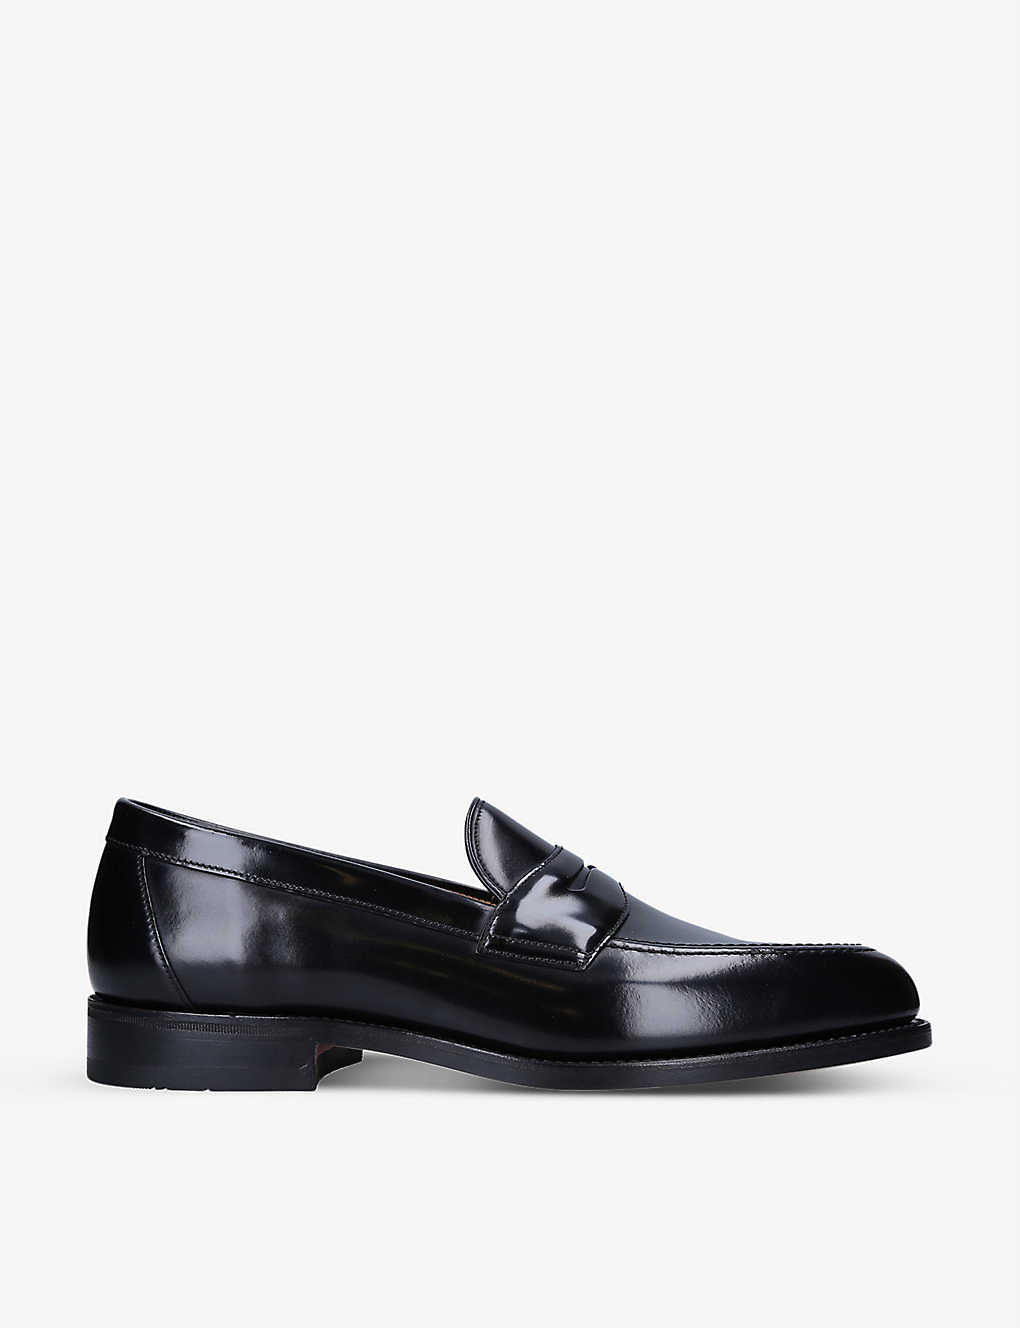 Shop Loake Men's Black Imperial Strap Leather Loafers